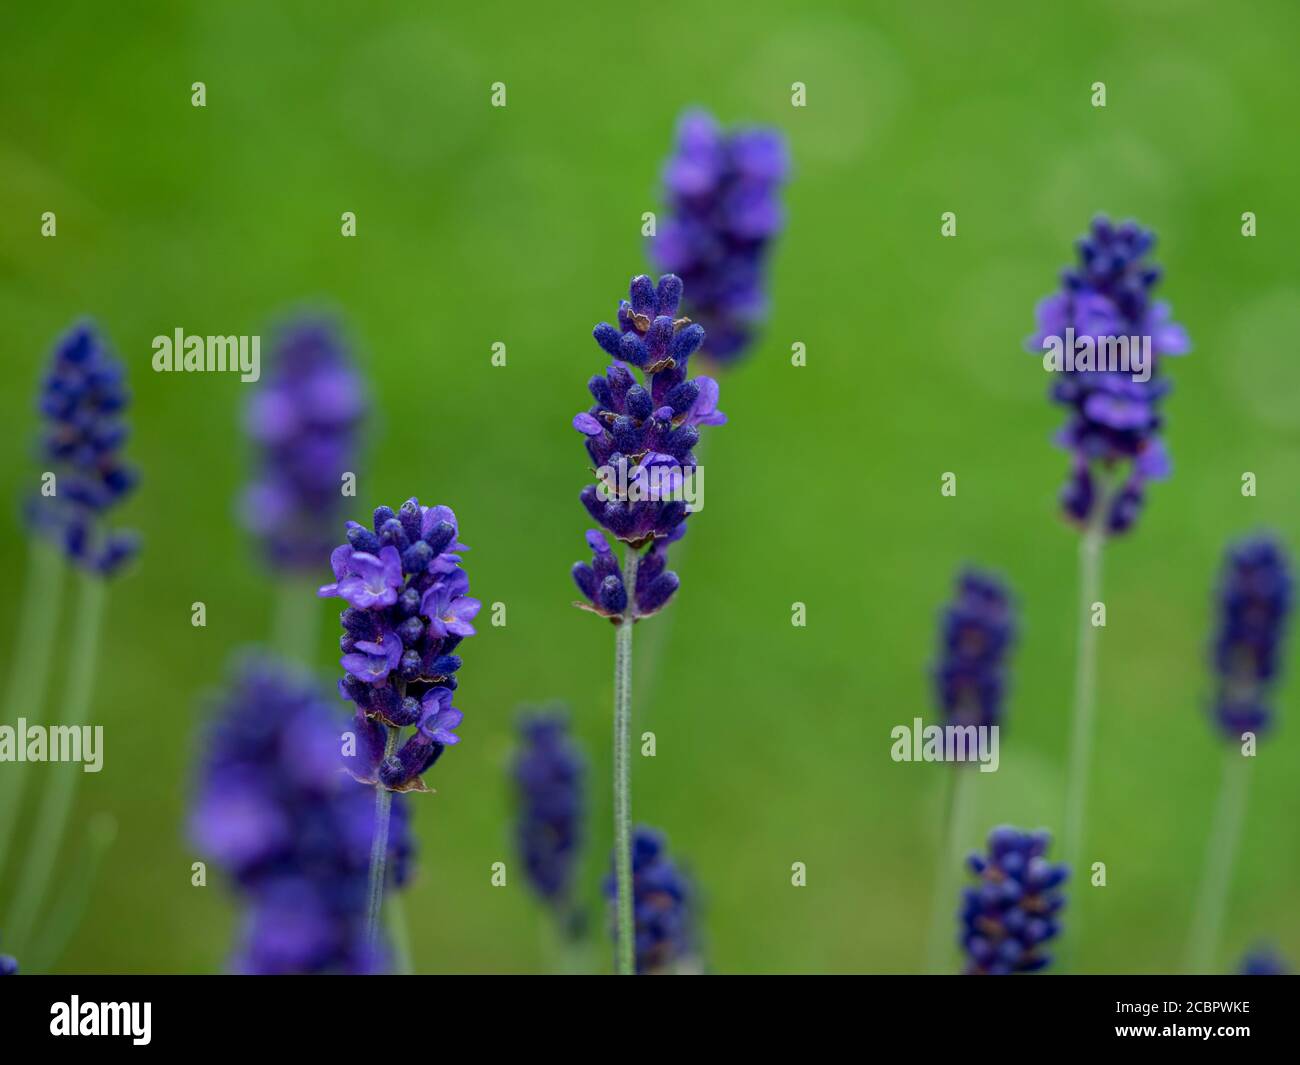 Closeup of lavender flowers, variety Hidcote Blue, with a green grass background Stock Photo